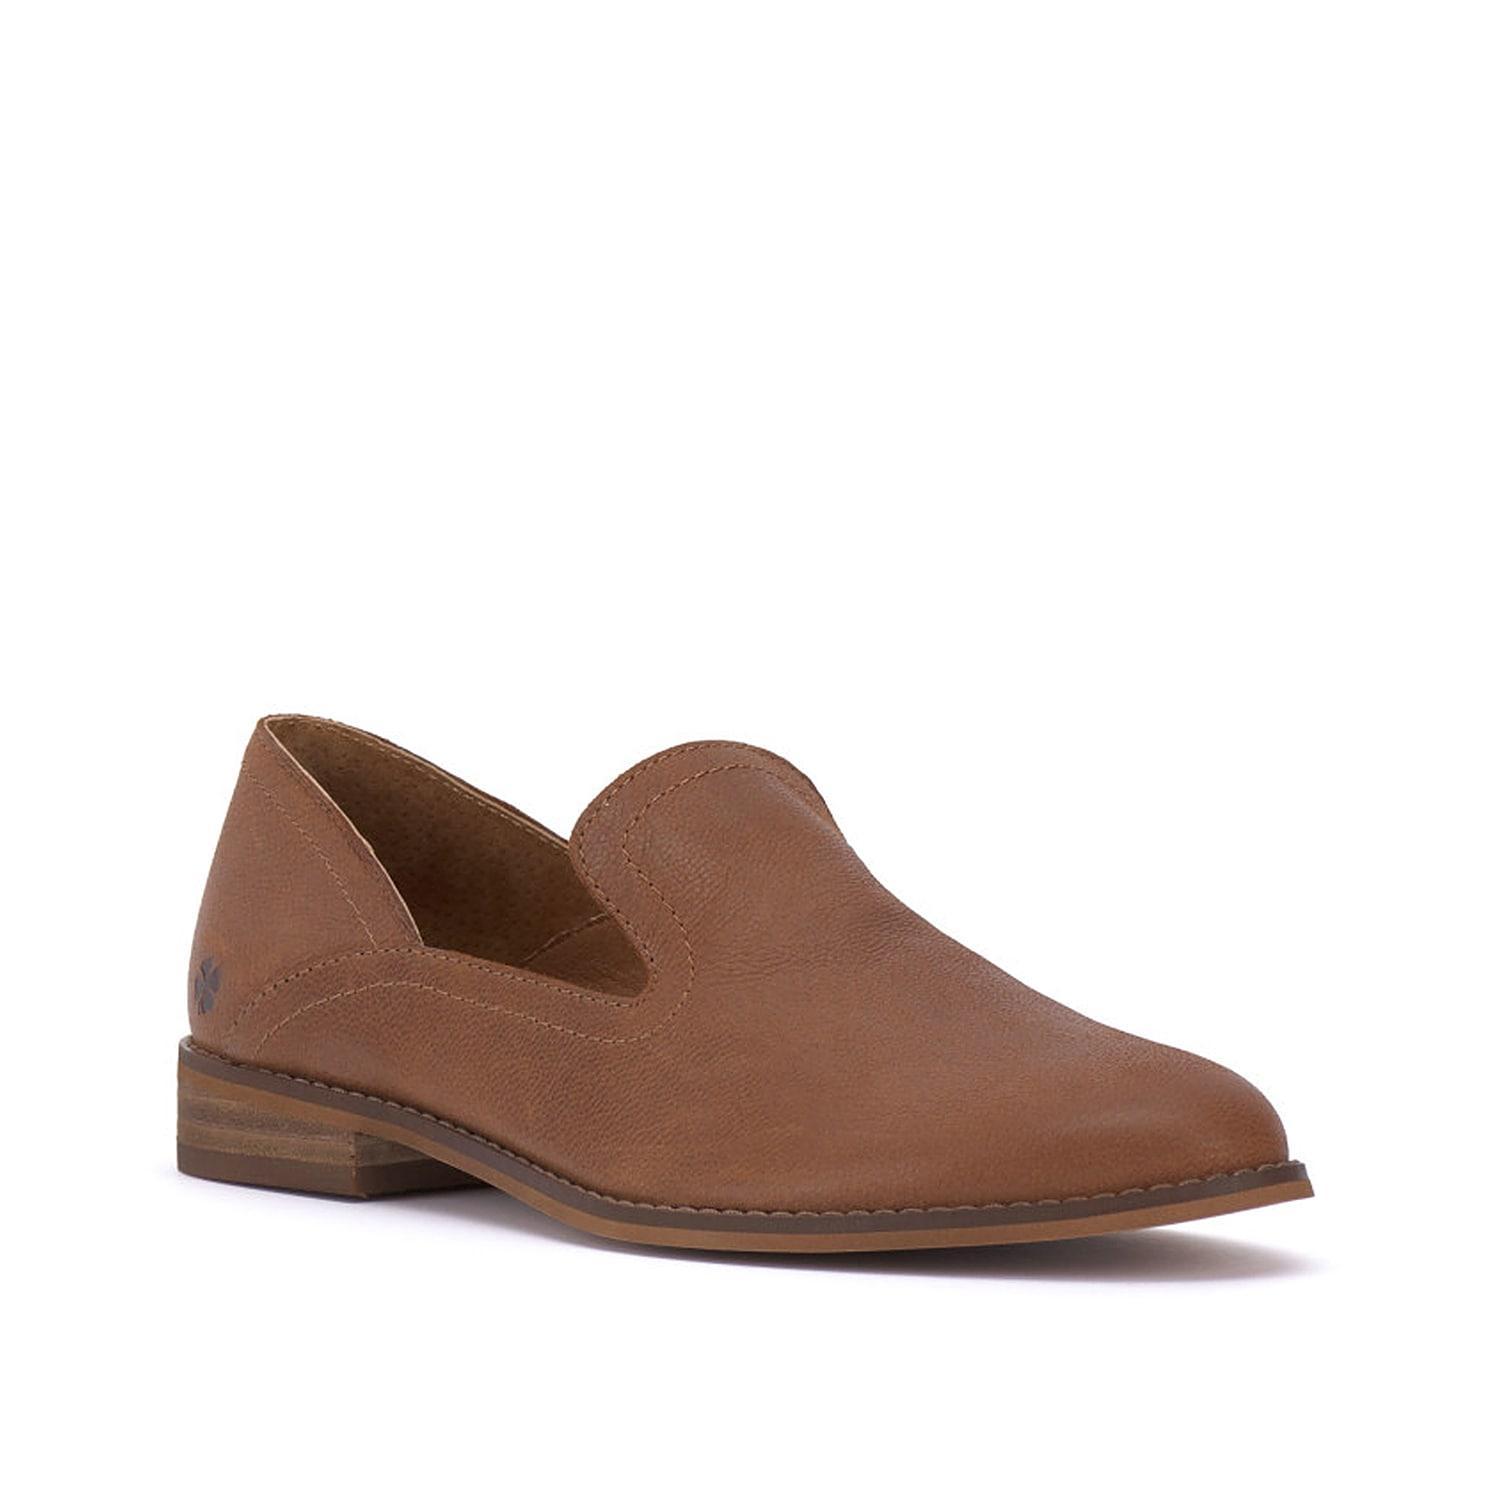 Lucky Brand Ellanzo Leather Loafers Product Image